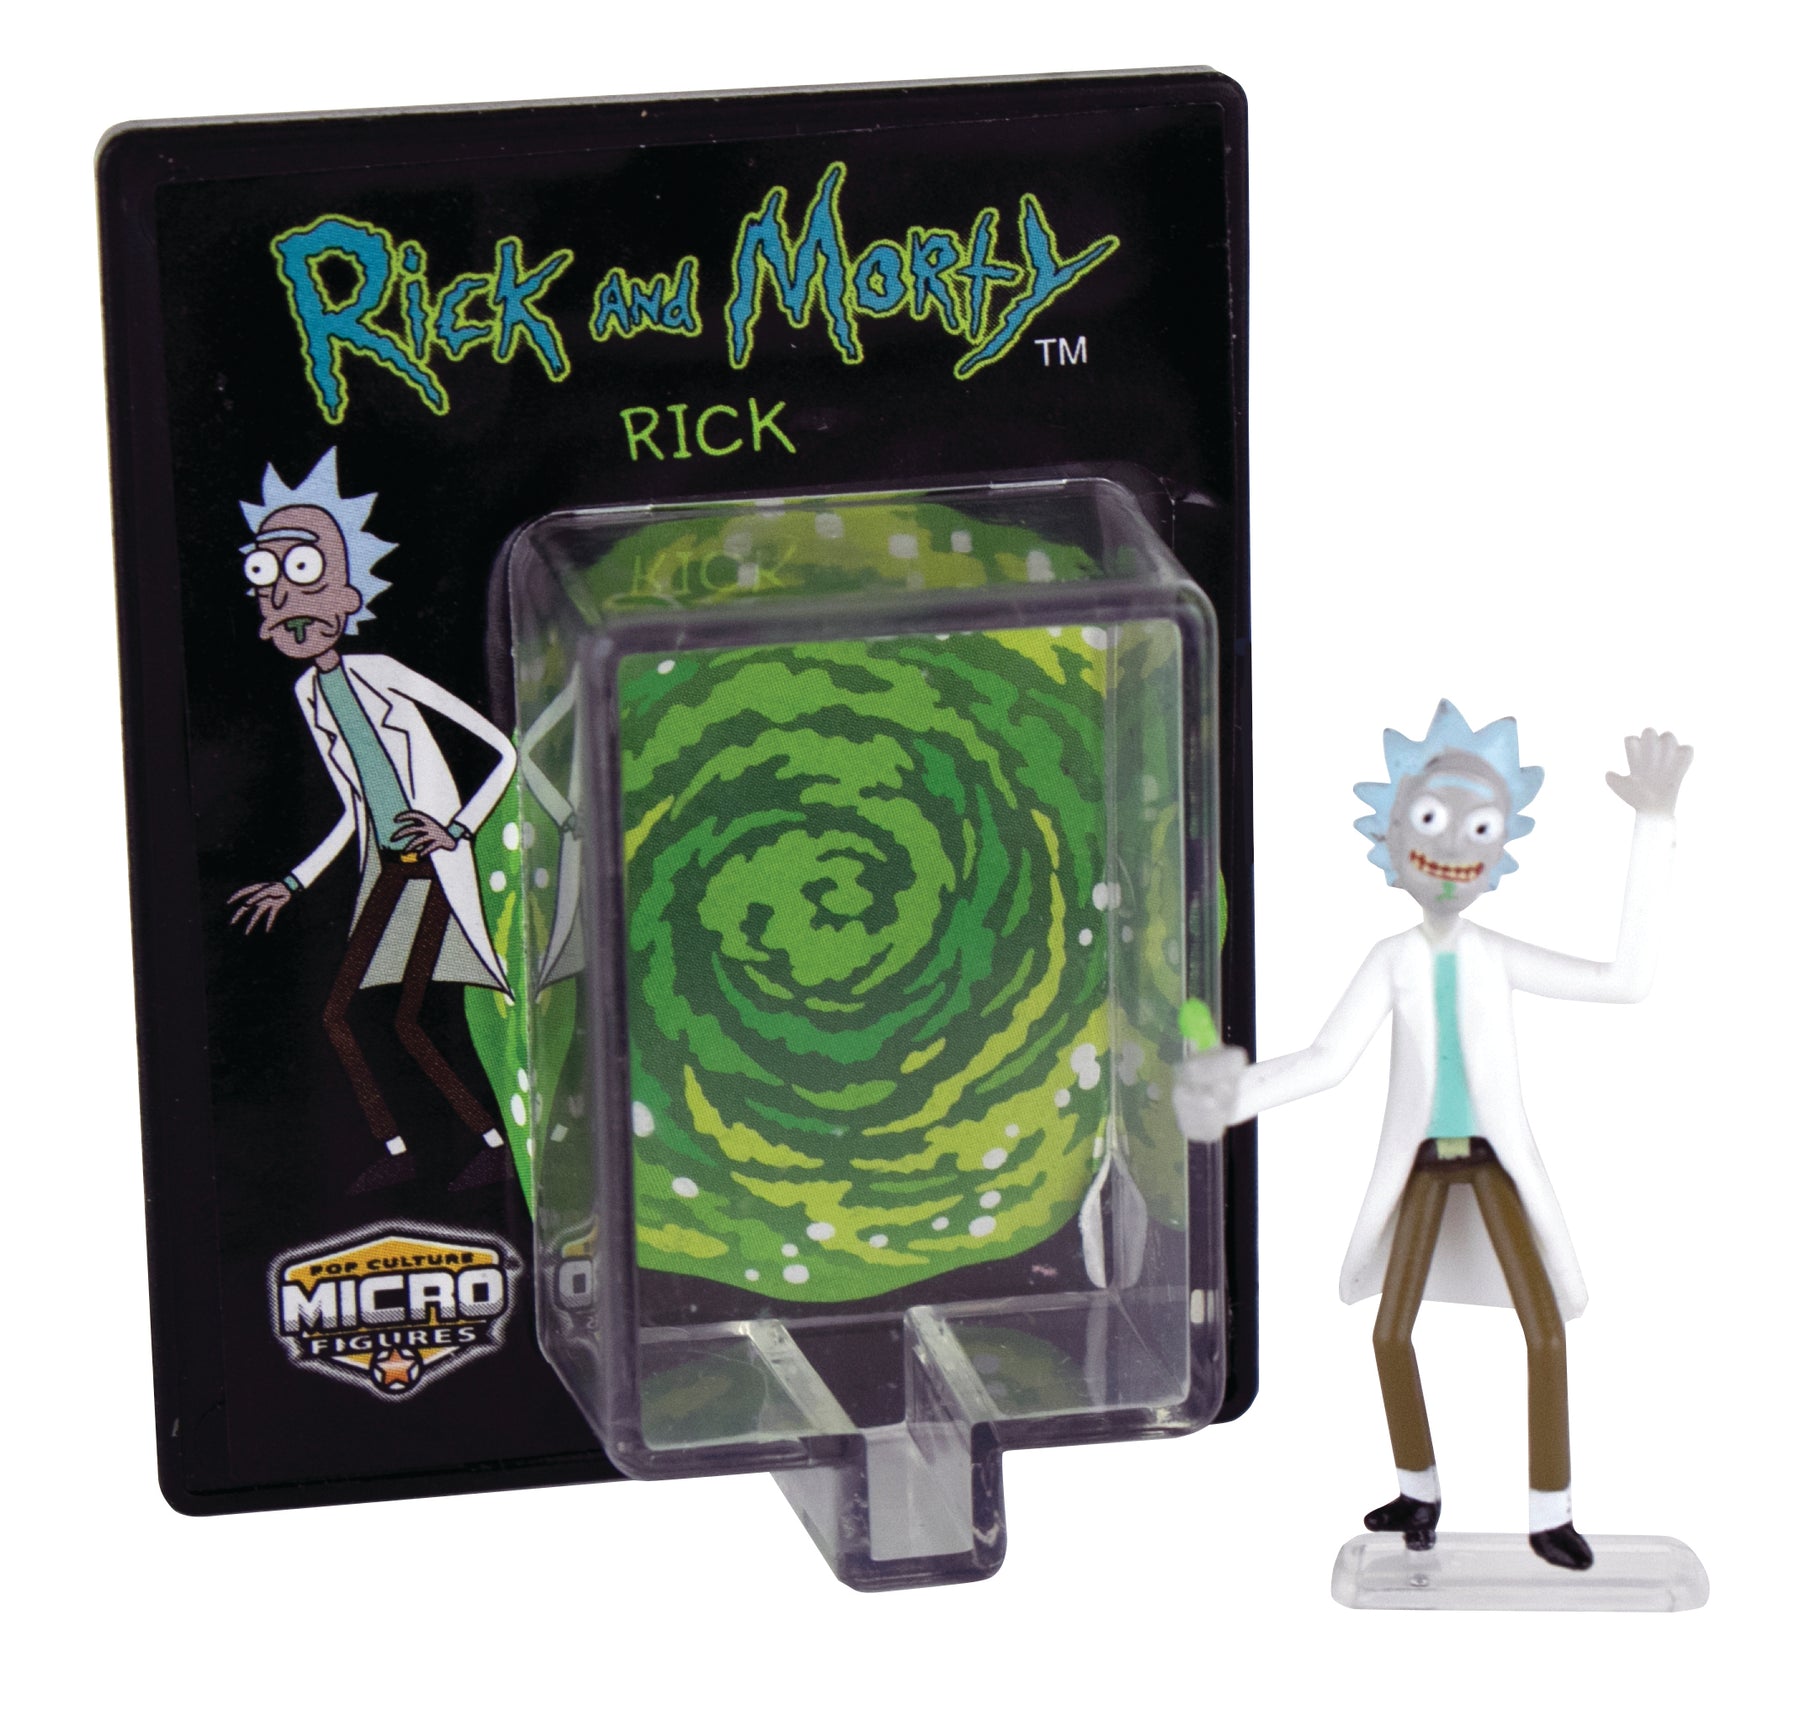 World's Smallest Rick and Morty - Rick Micro Action Figure